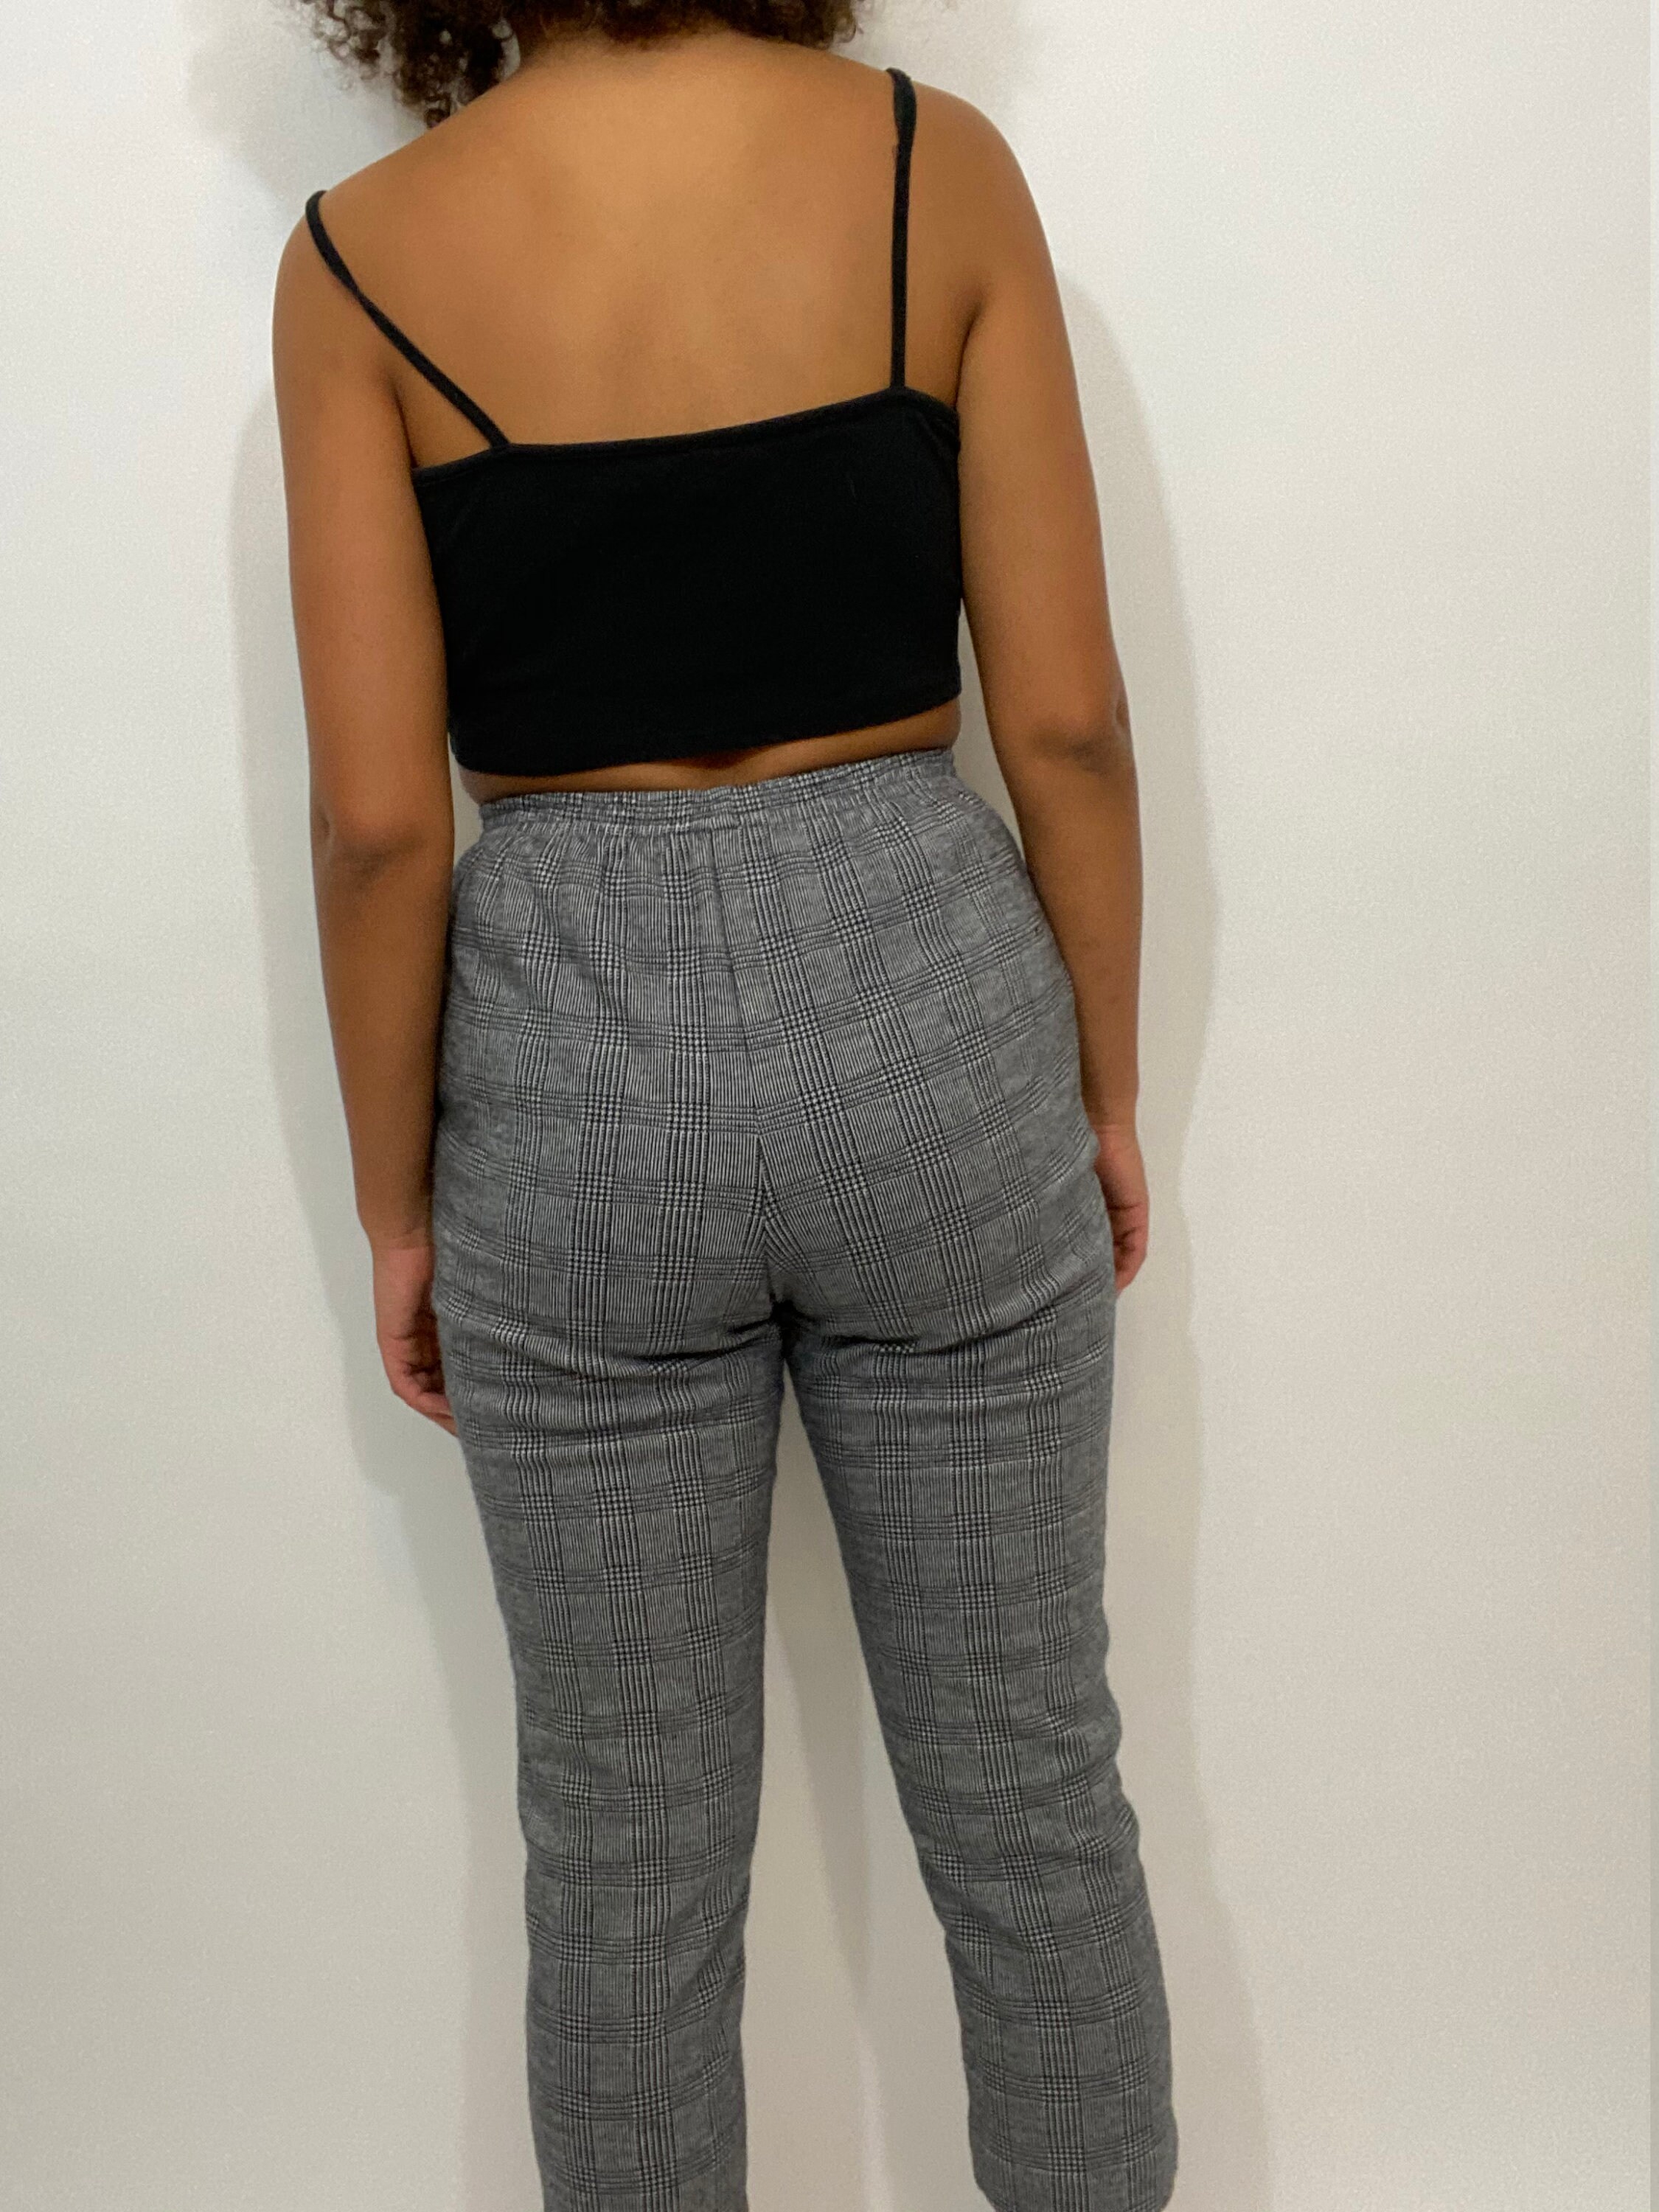 80s / 90s Plaid Pants. 1980s 1990s White and Black Checkered | Etsy